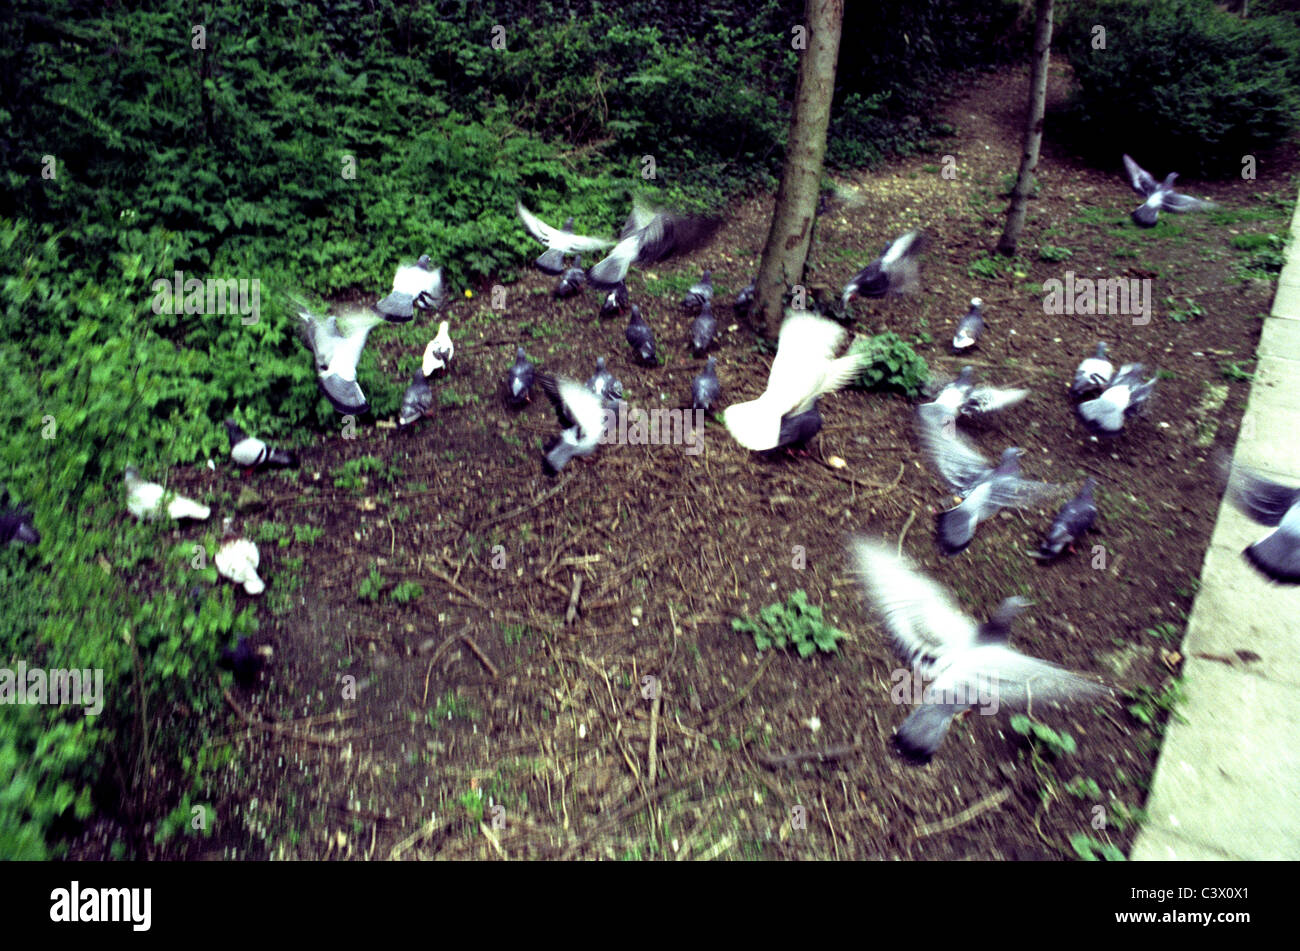 Pigeons flying in the forest Stock Photo